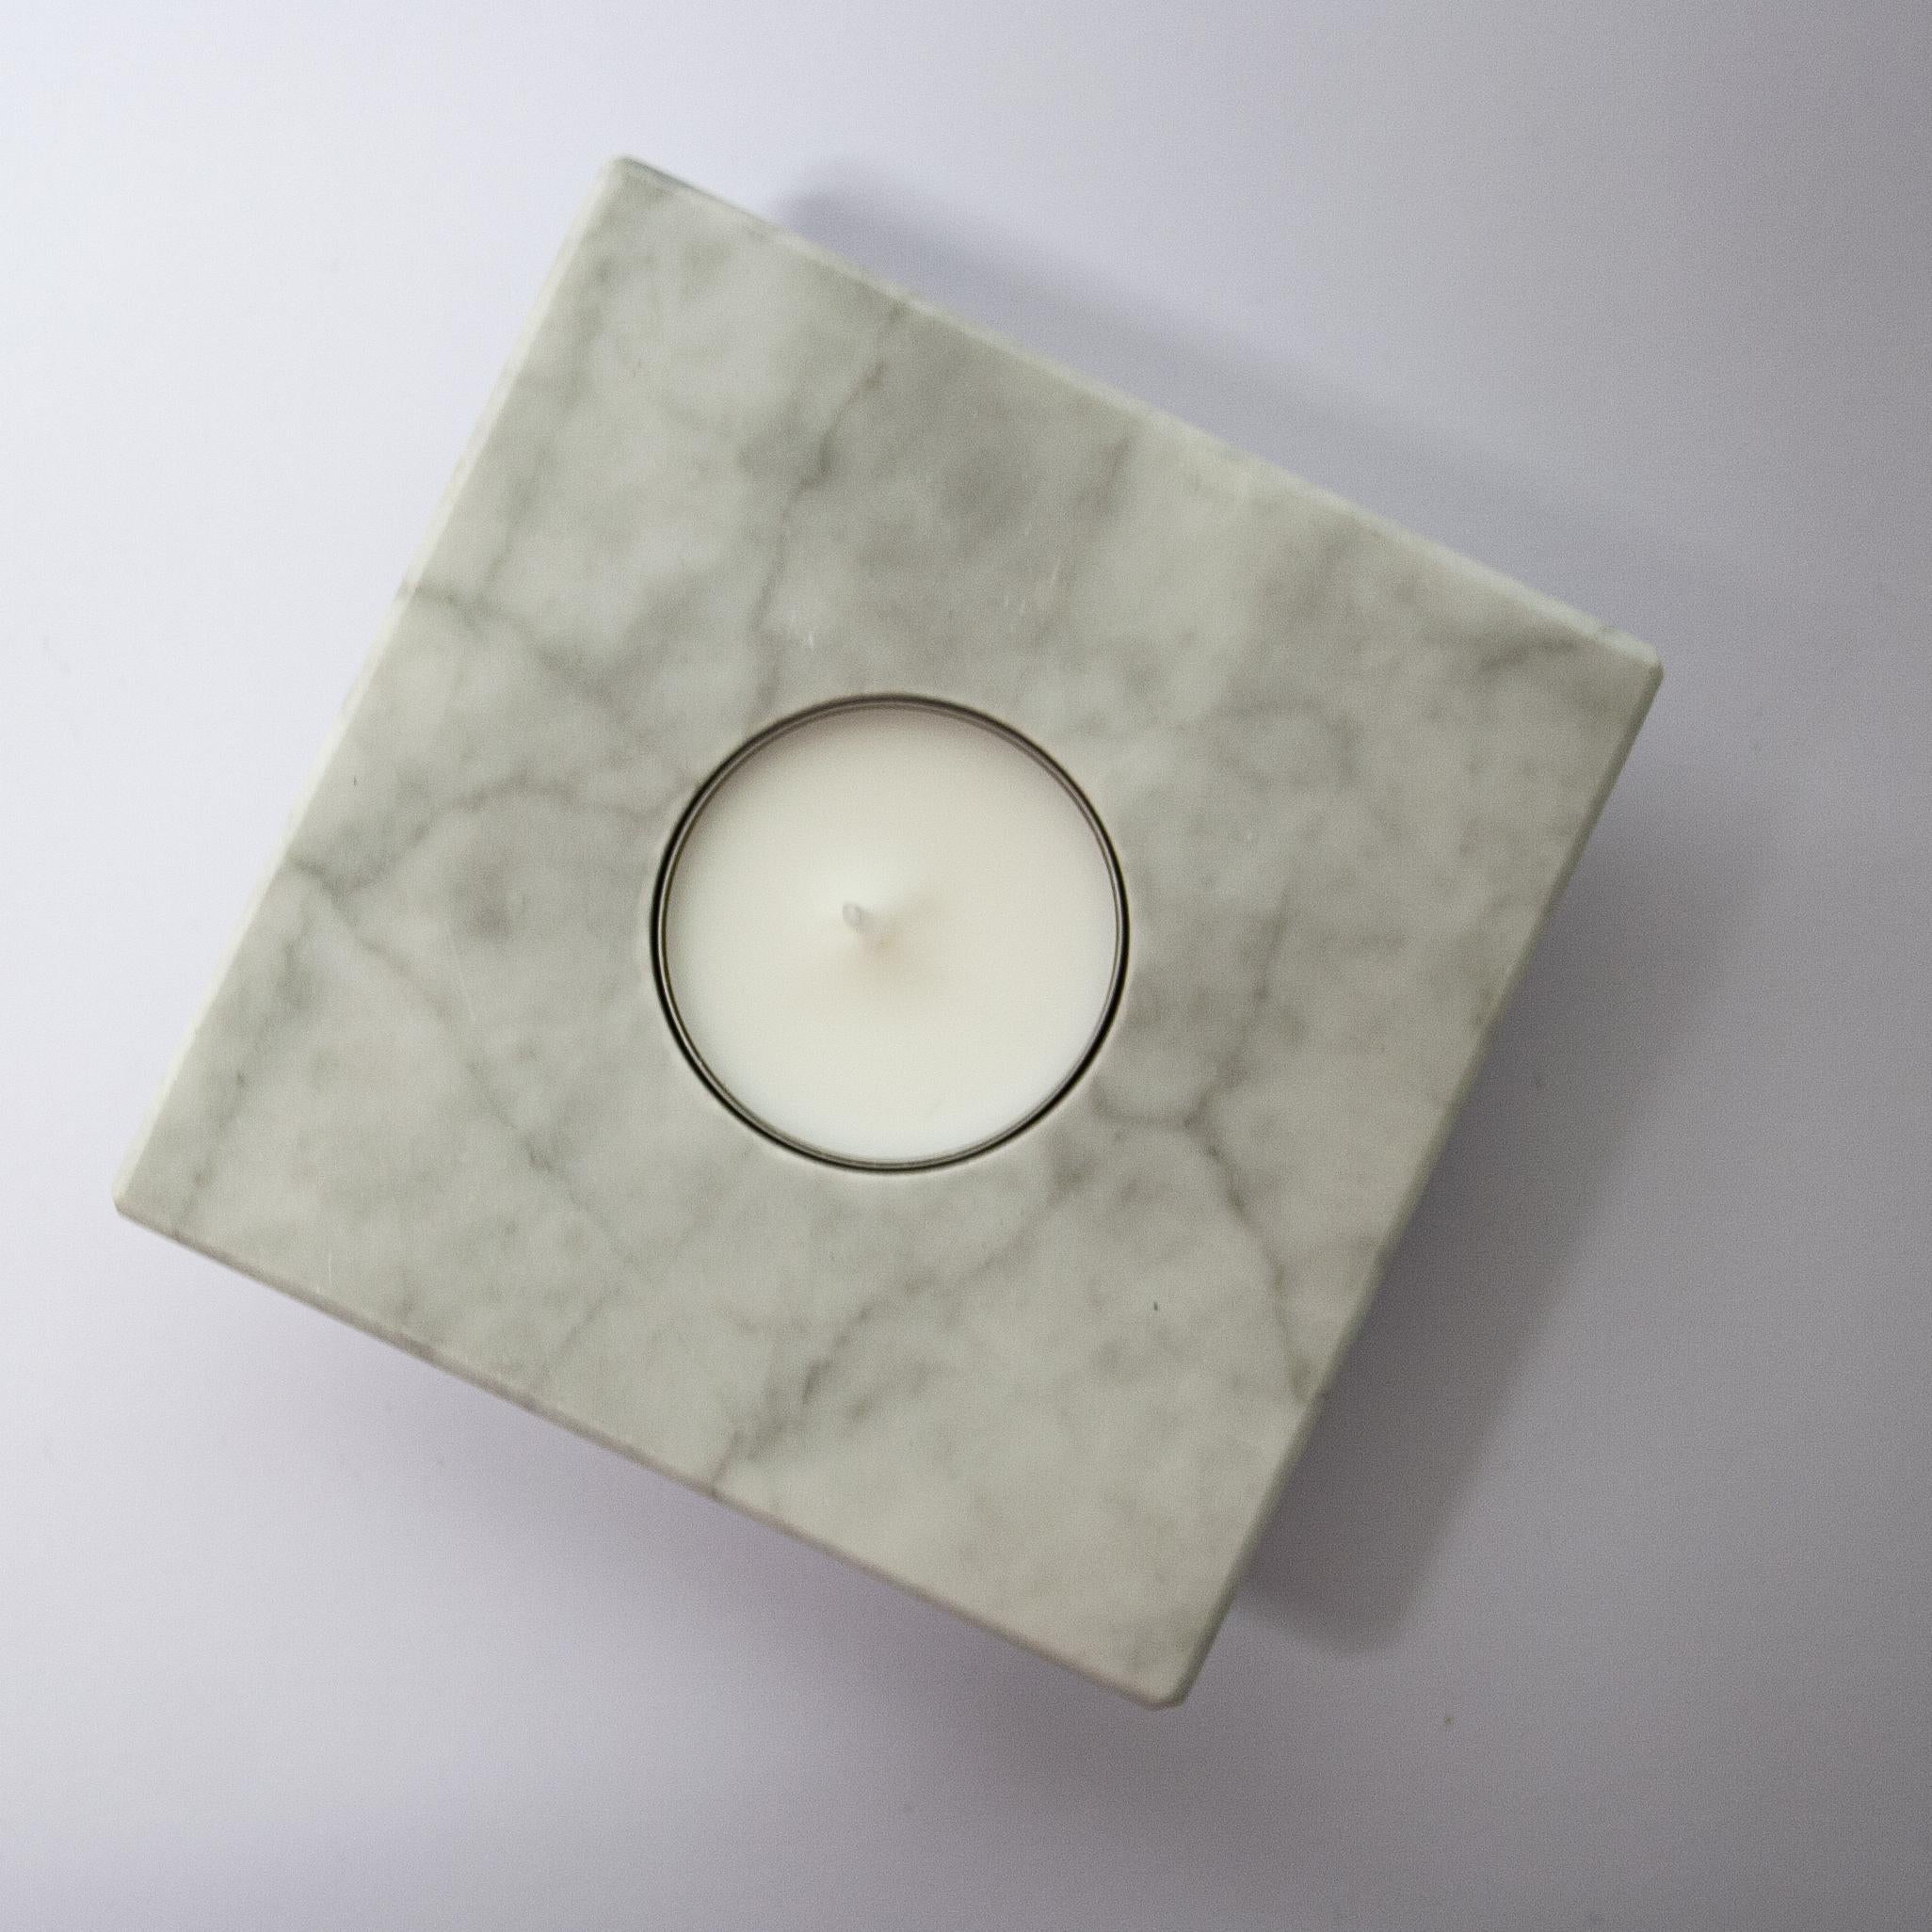 Polished White Carrara Marble Candle Holder Contemporary Design Mother’s Day Gift Spain For Sale